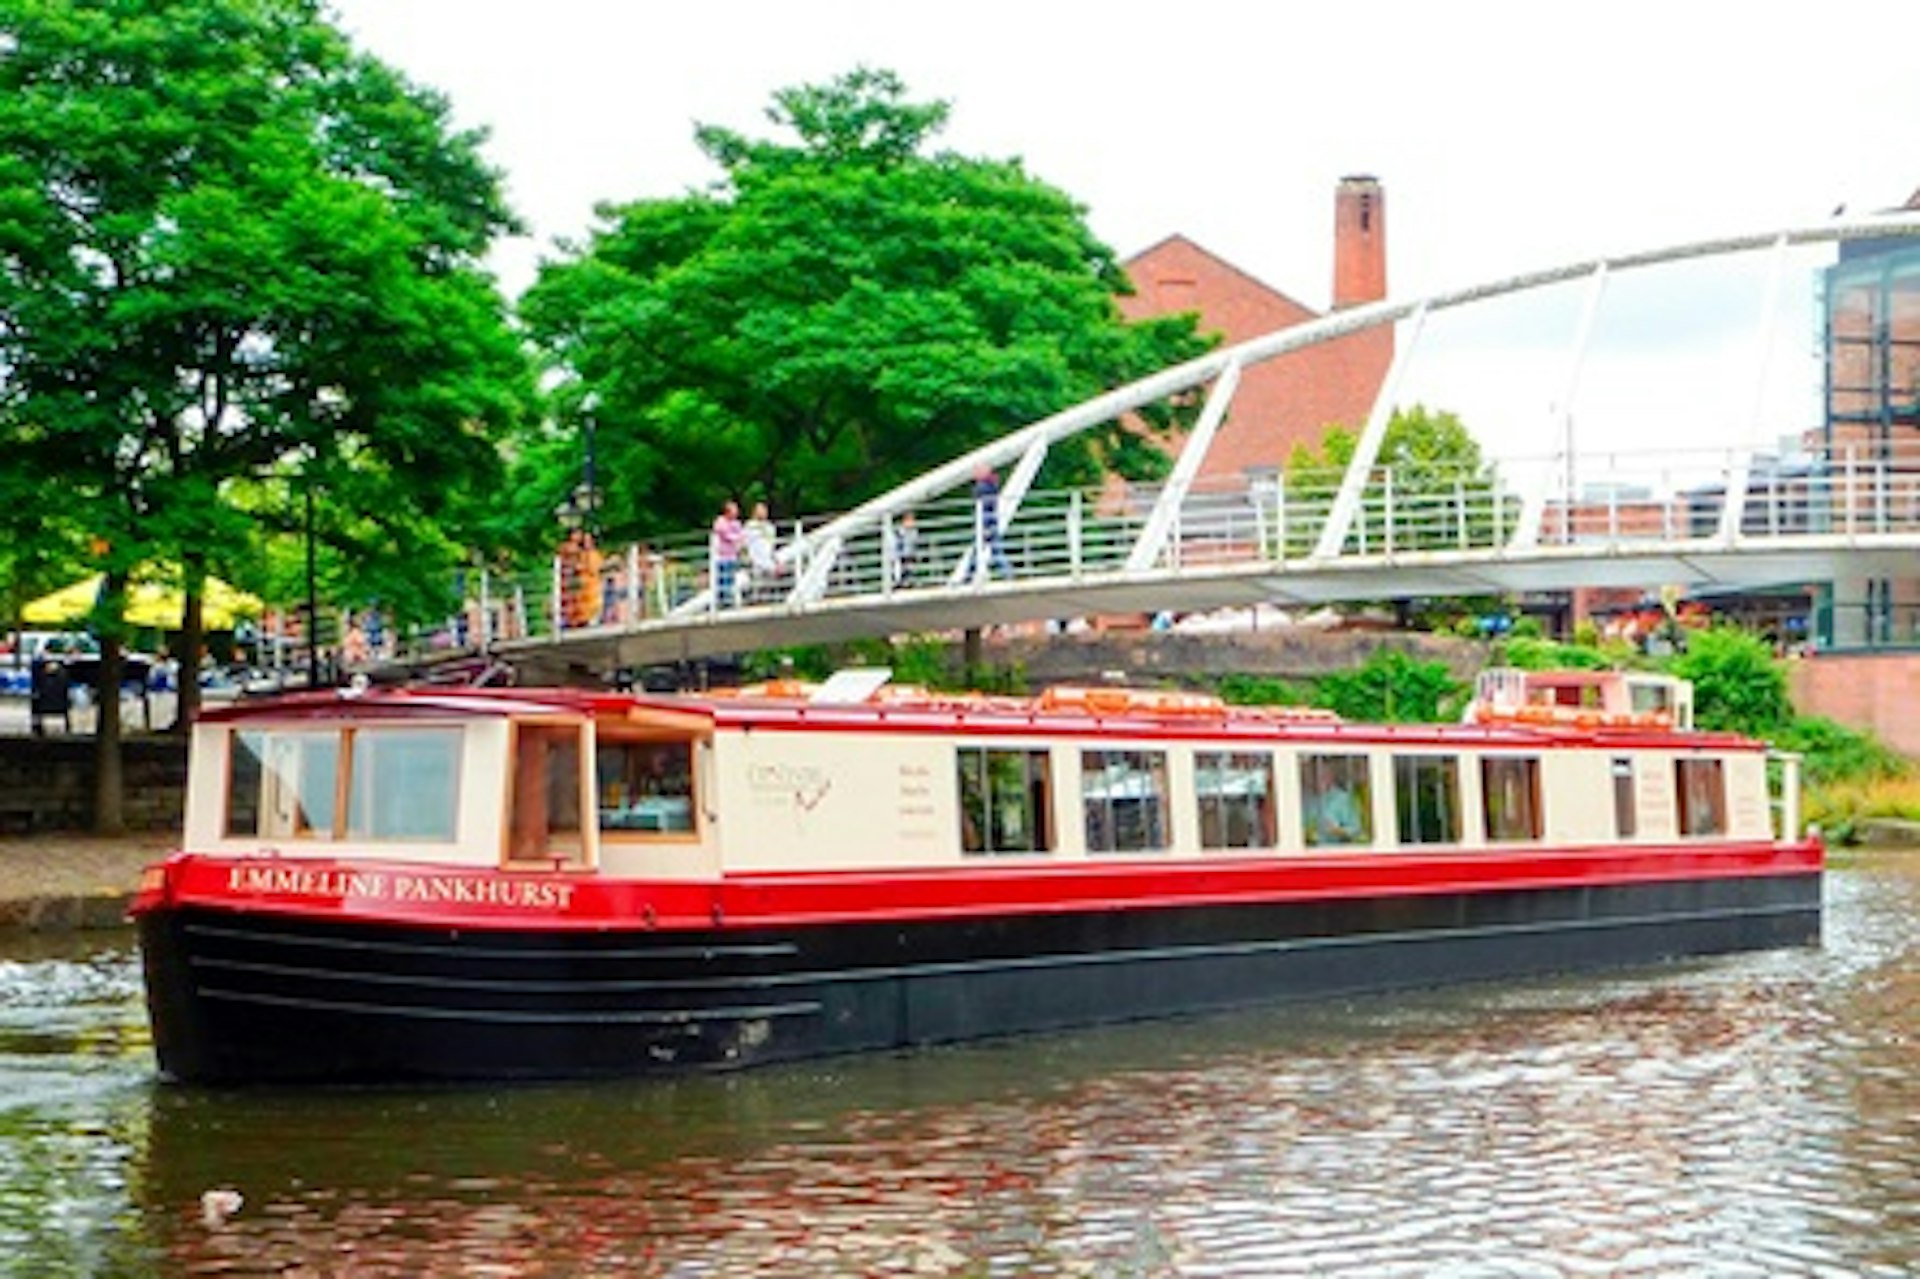 Manchester United Football Club Stadium Tour and Leisure Cruise for One Adult and One Child 4